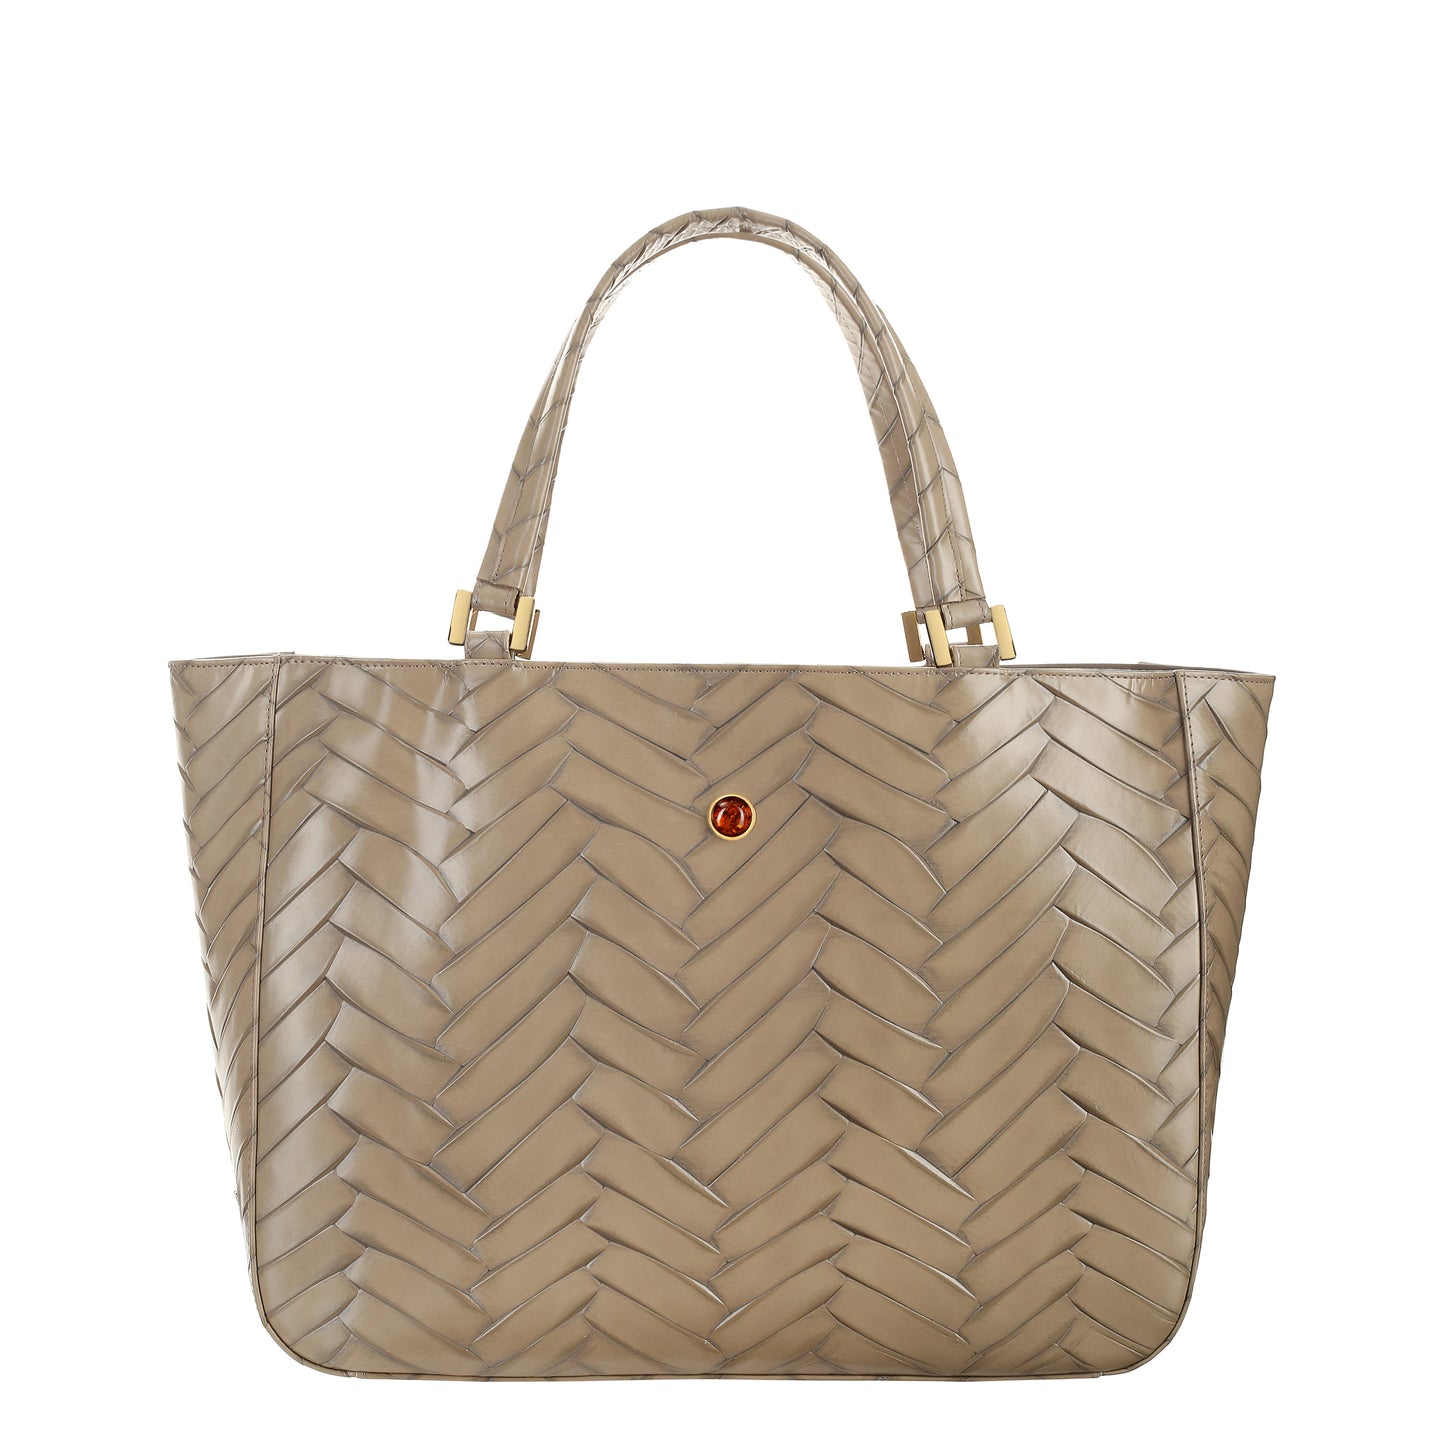 Women's leather bag Mamma braid taupe